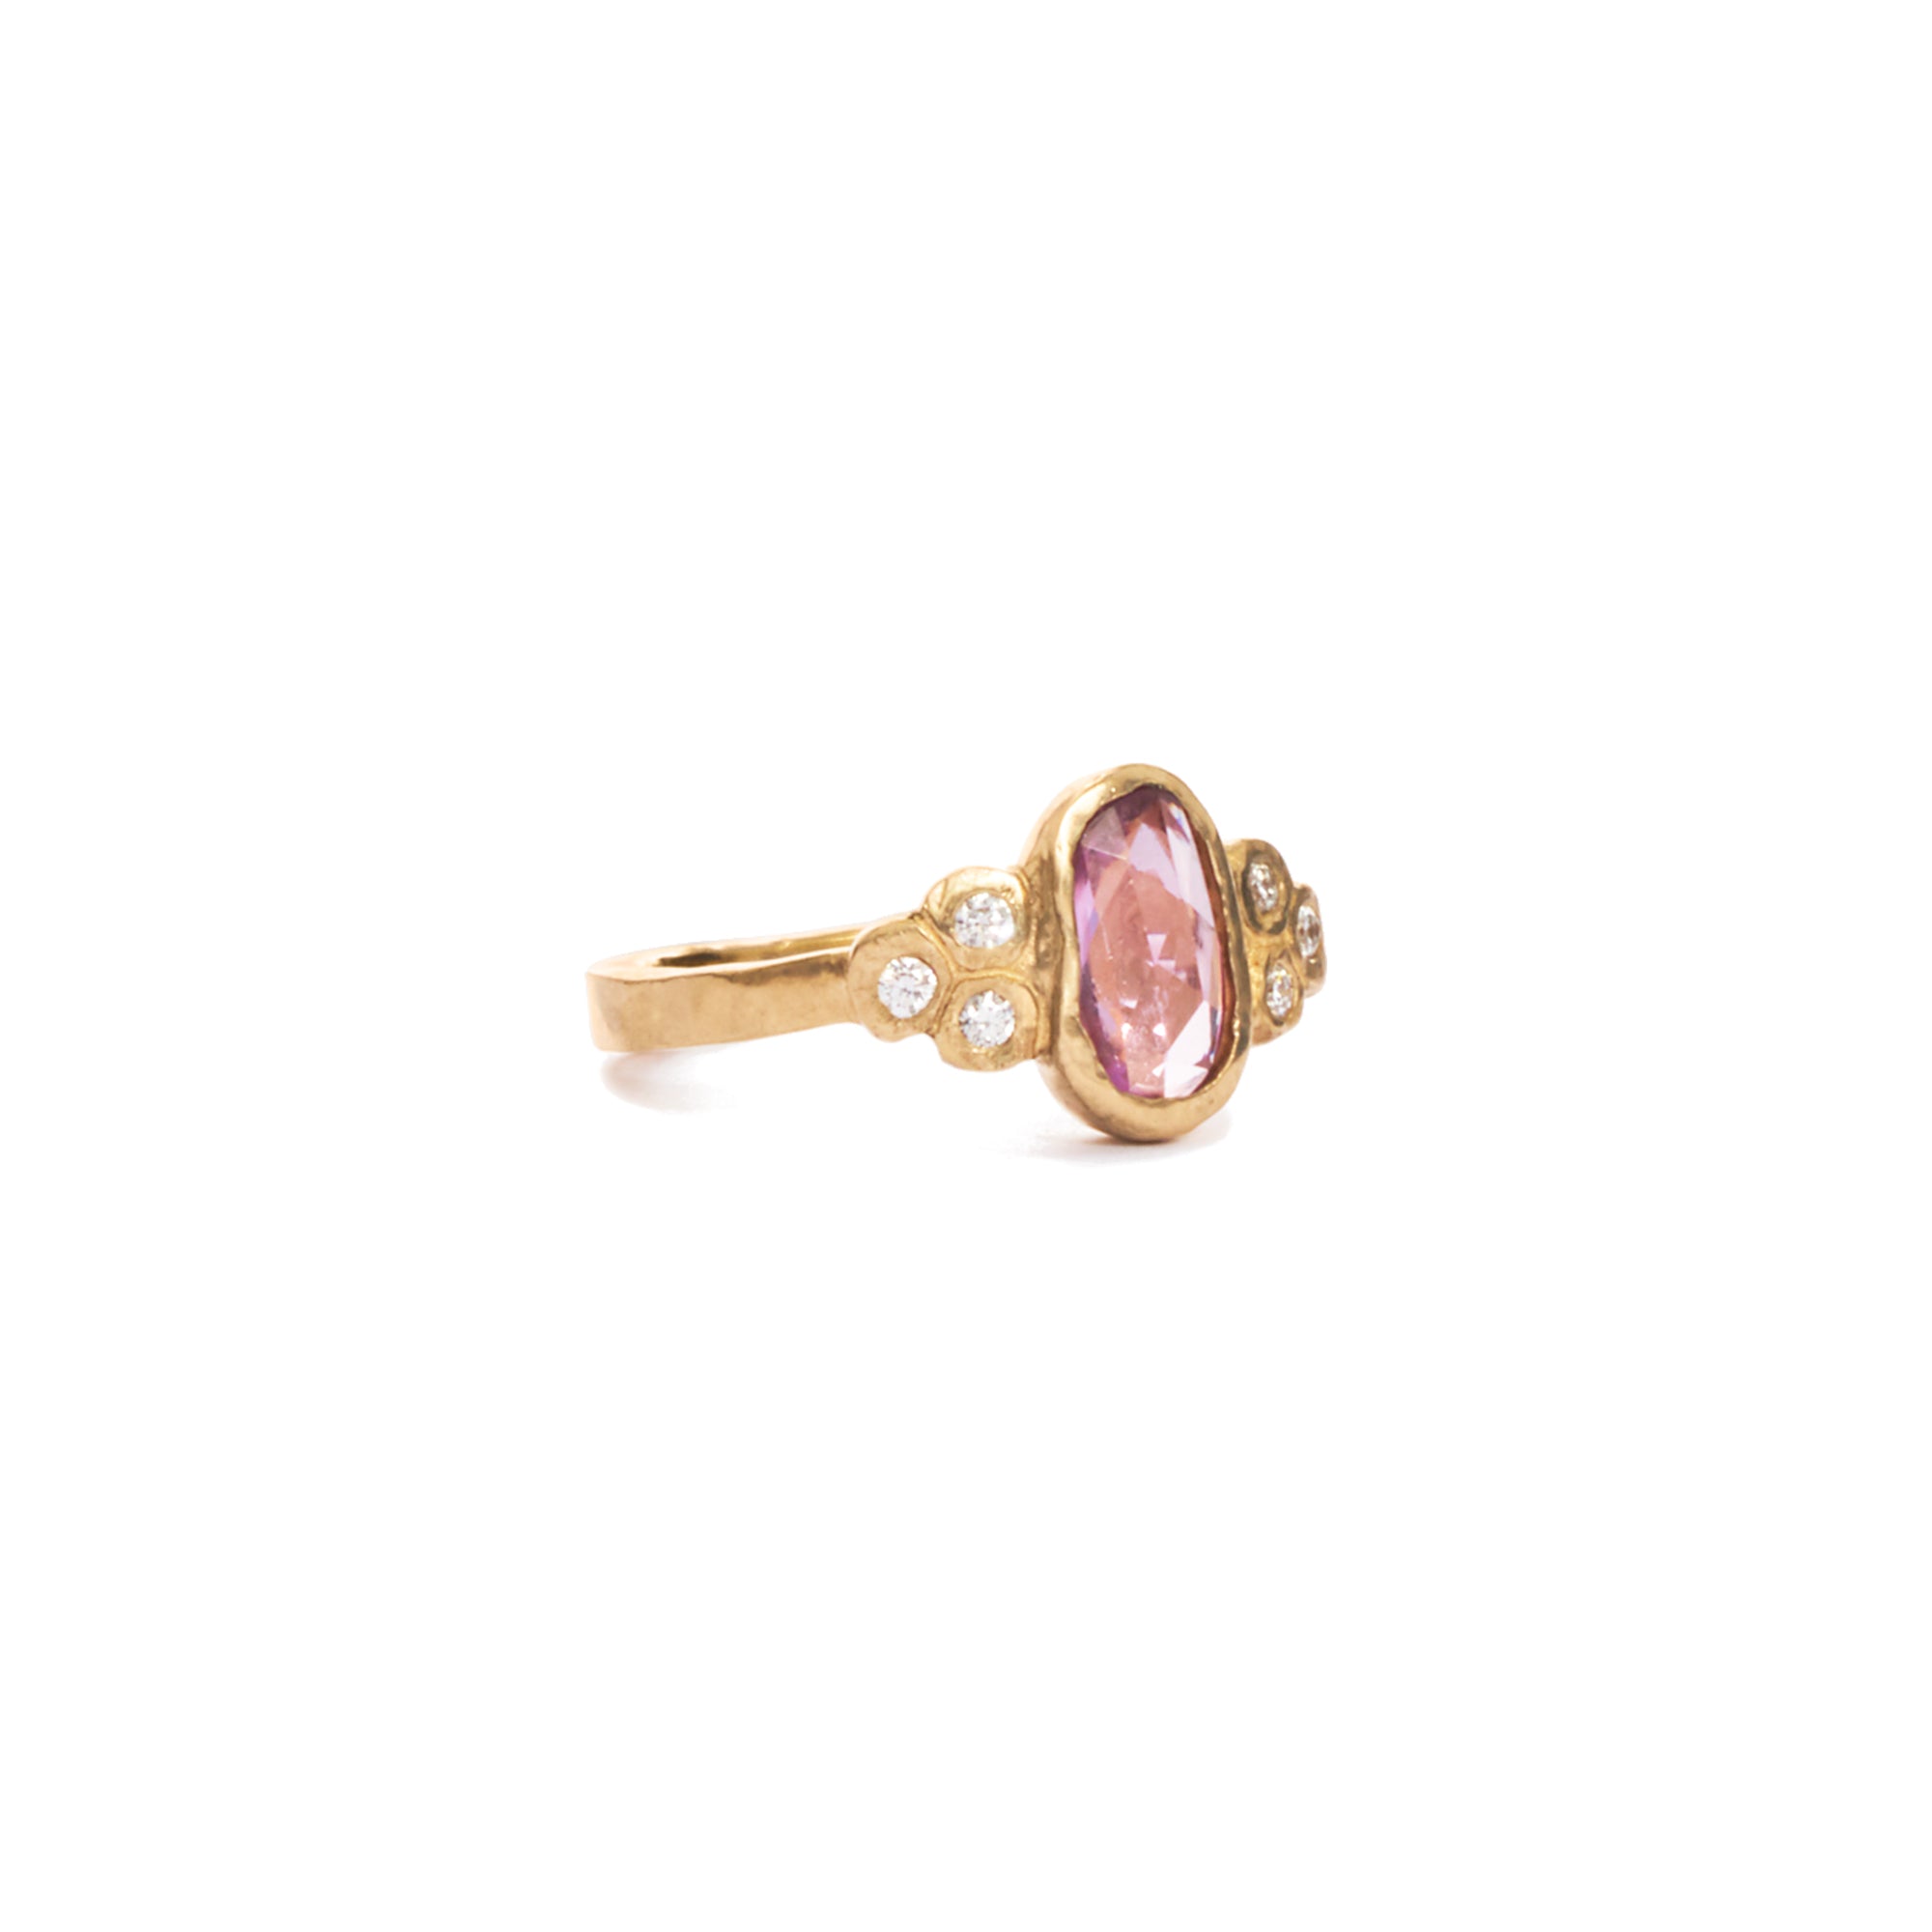 This unique ONE-OF-A-KIND pink sapphire solitaire makes a wonderful engagement ring for the alternative bride.